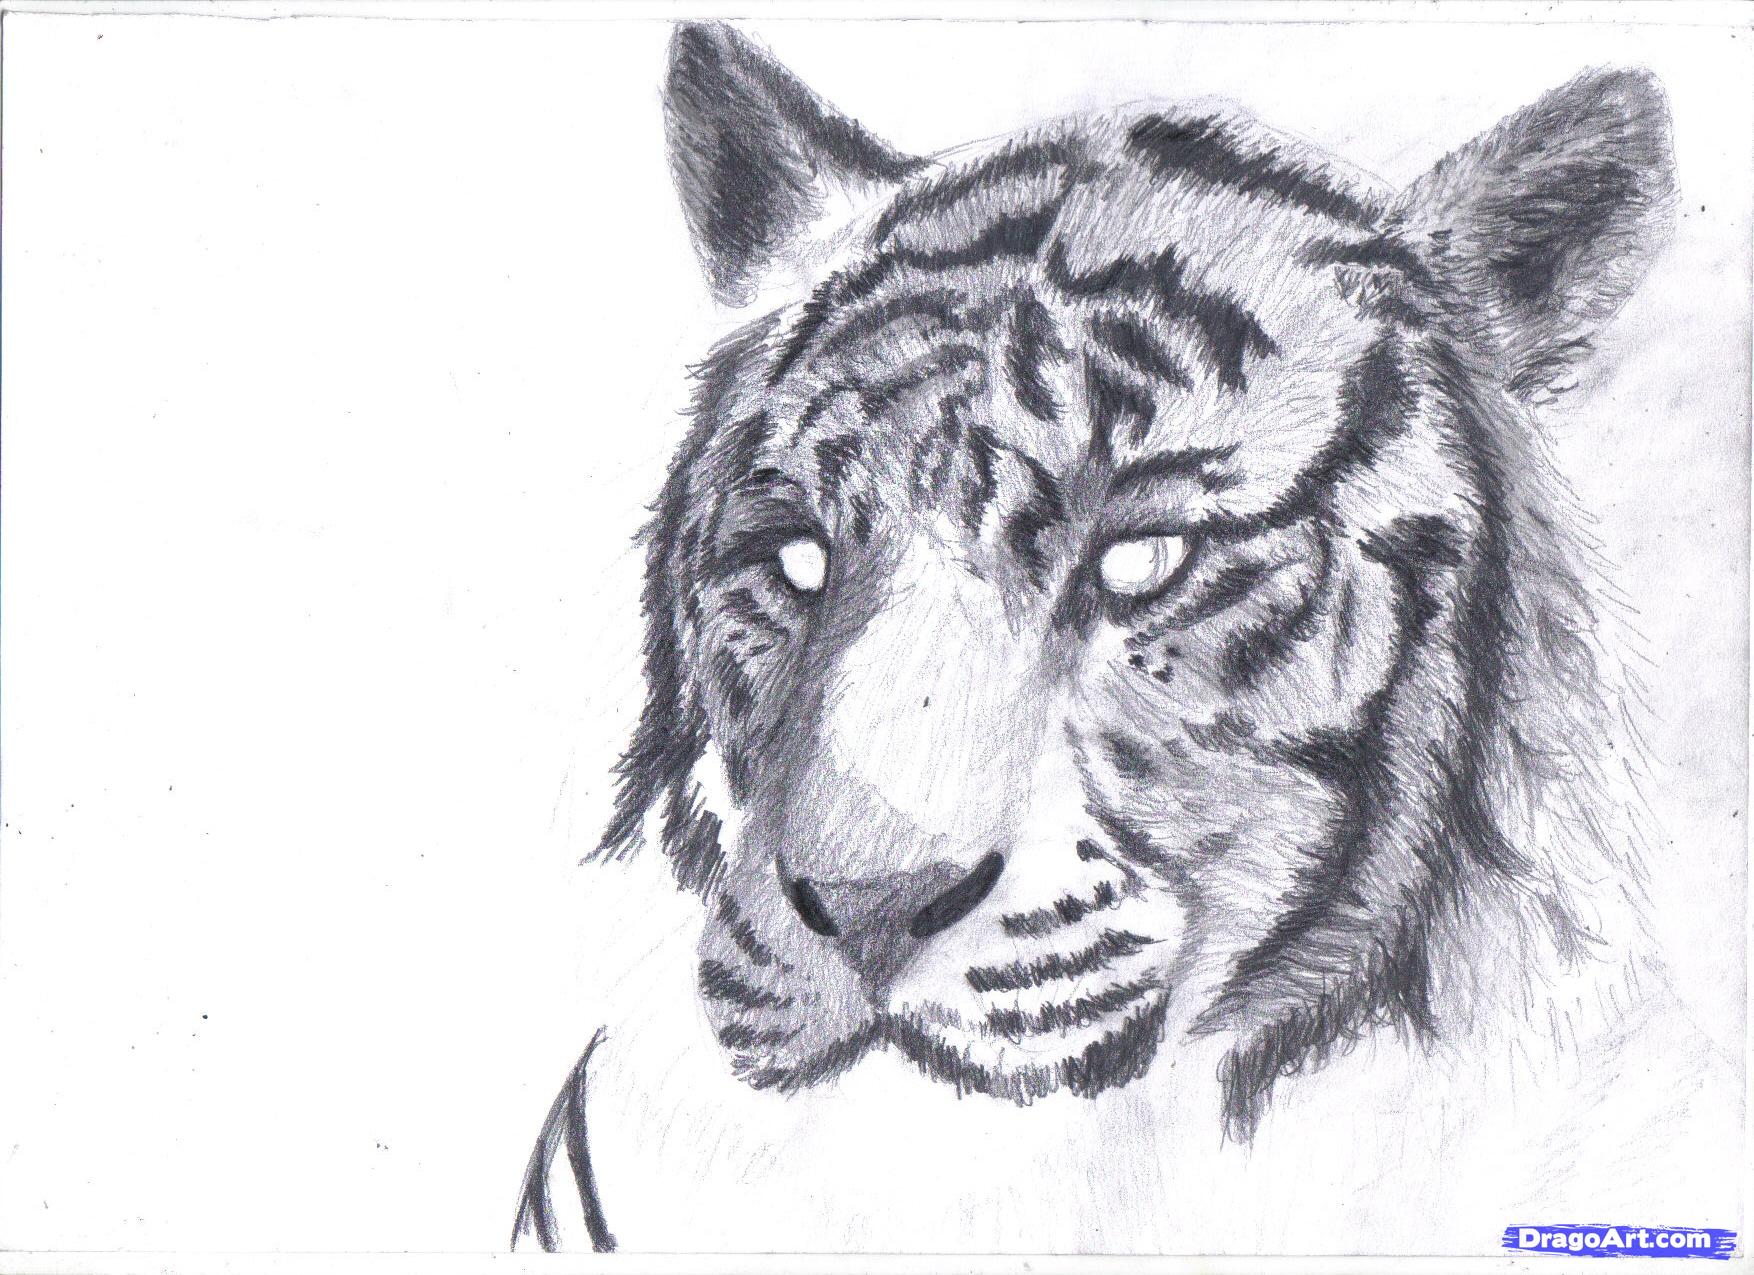 How To Draw A White Tiger, Draw A Tiger In Pencil, Step By Step